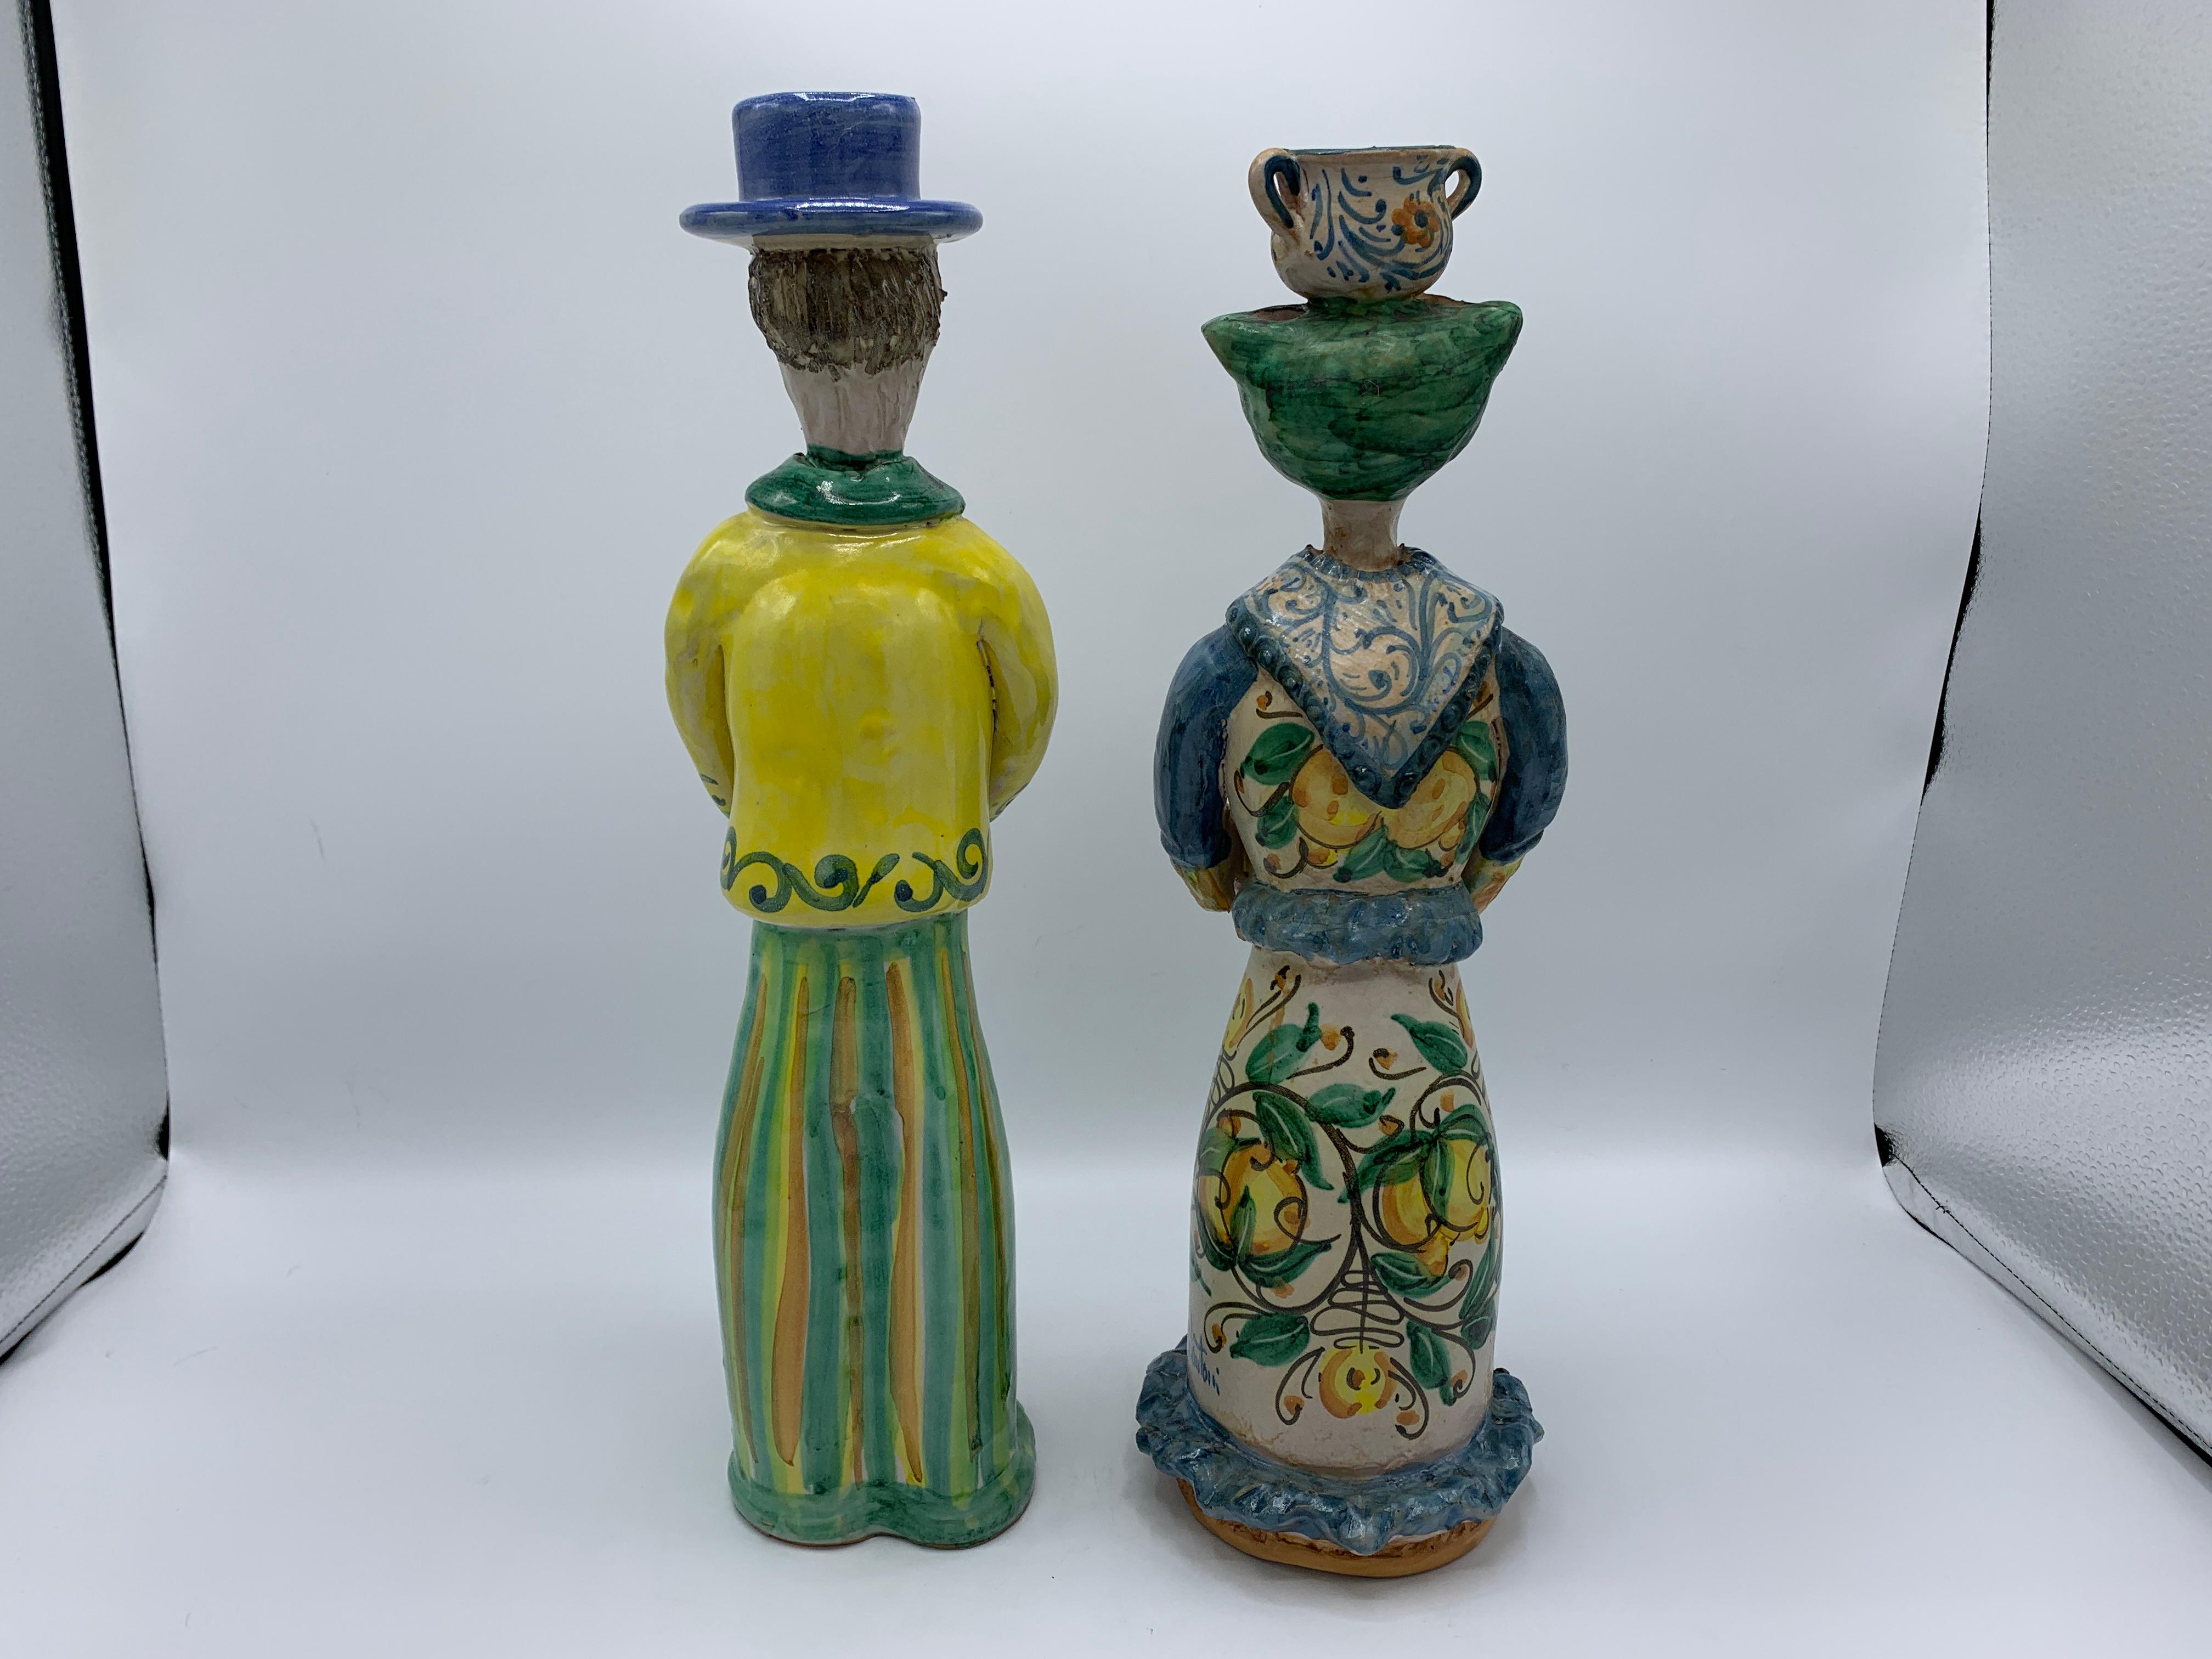 Hand-Crafted 1960s Italian Polychrome Terracotta Figural Sculpture Candlesticks, Pair